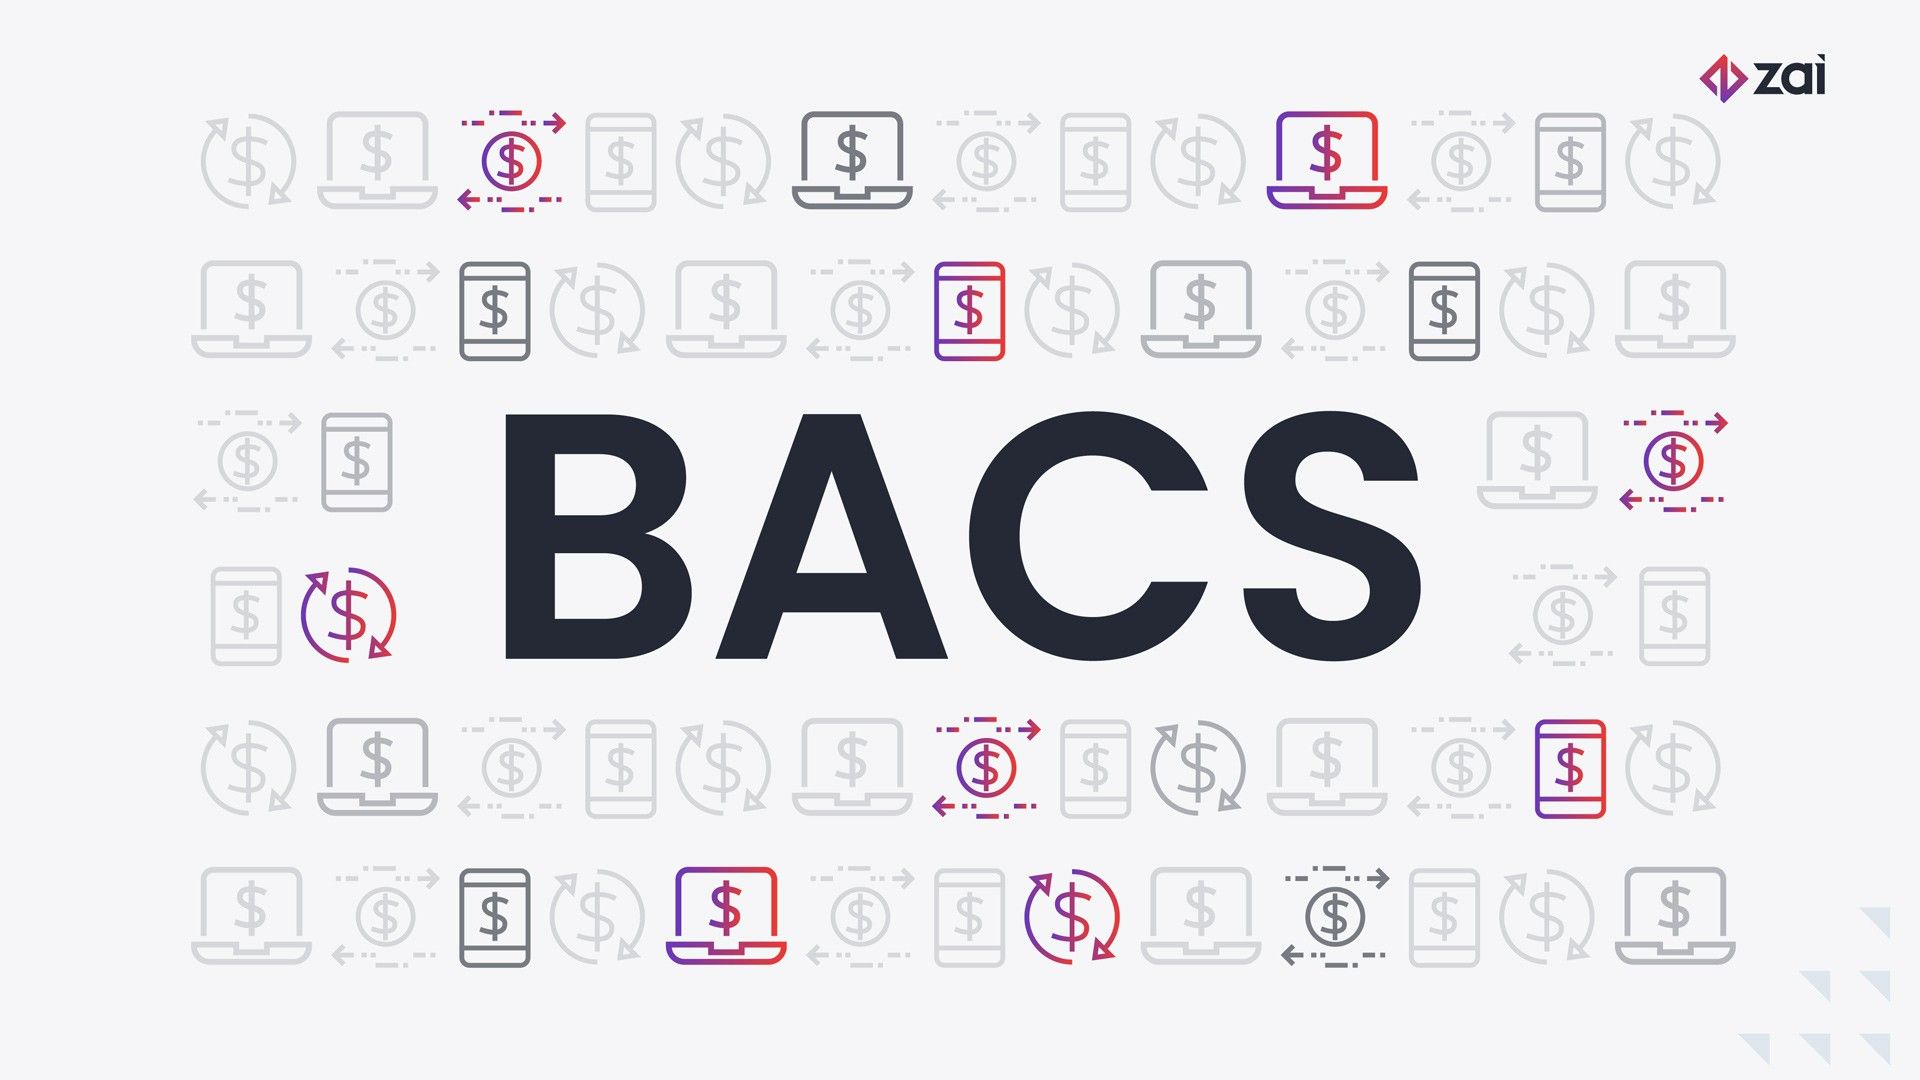 A guide to Bacs